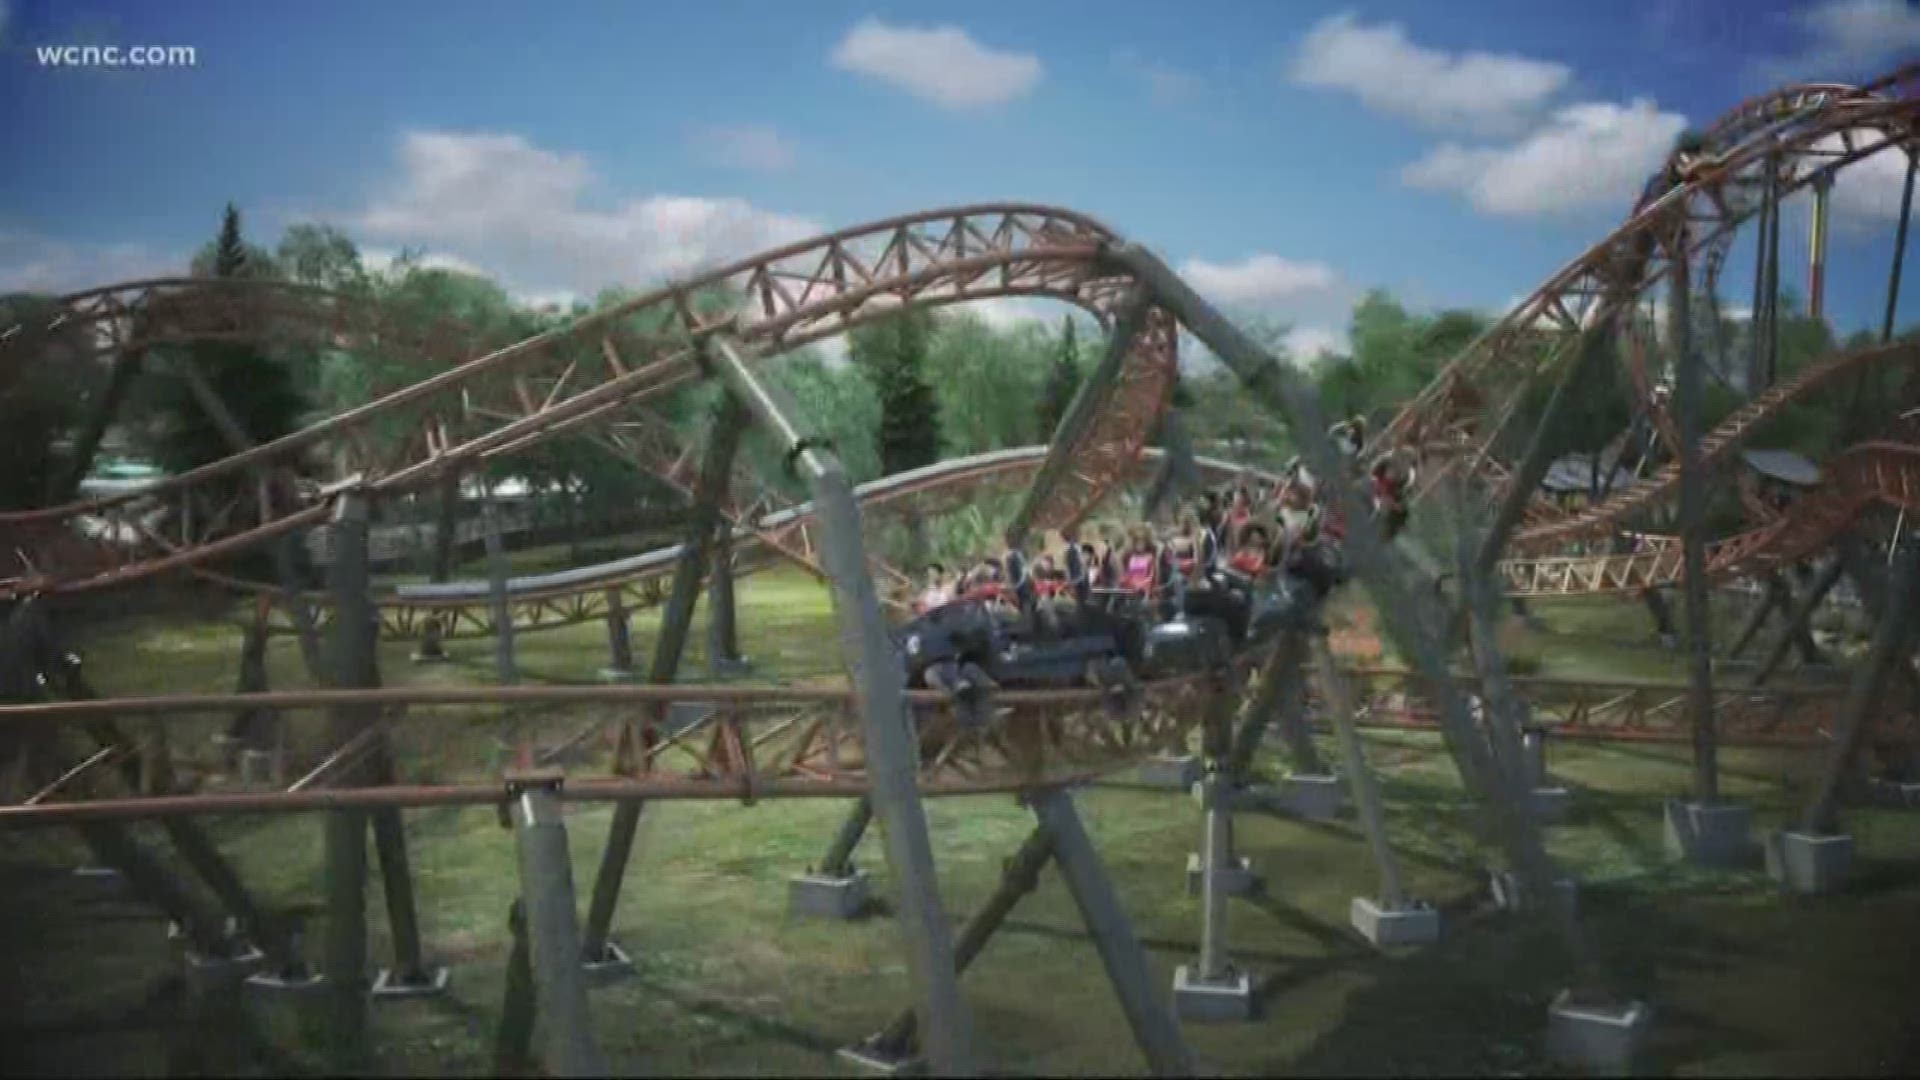 Carowinds is ready to give its guests a wild, brand-new ride with the opening of Copperhead Strike, the Carolinas' first-ever double launch coaster.